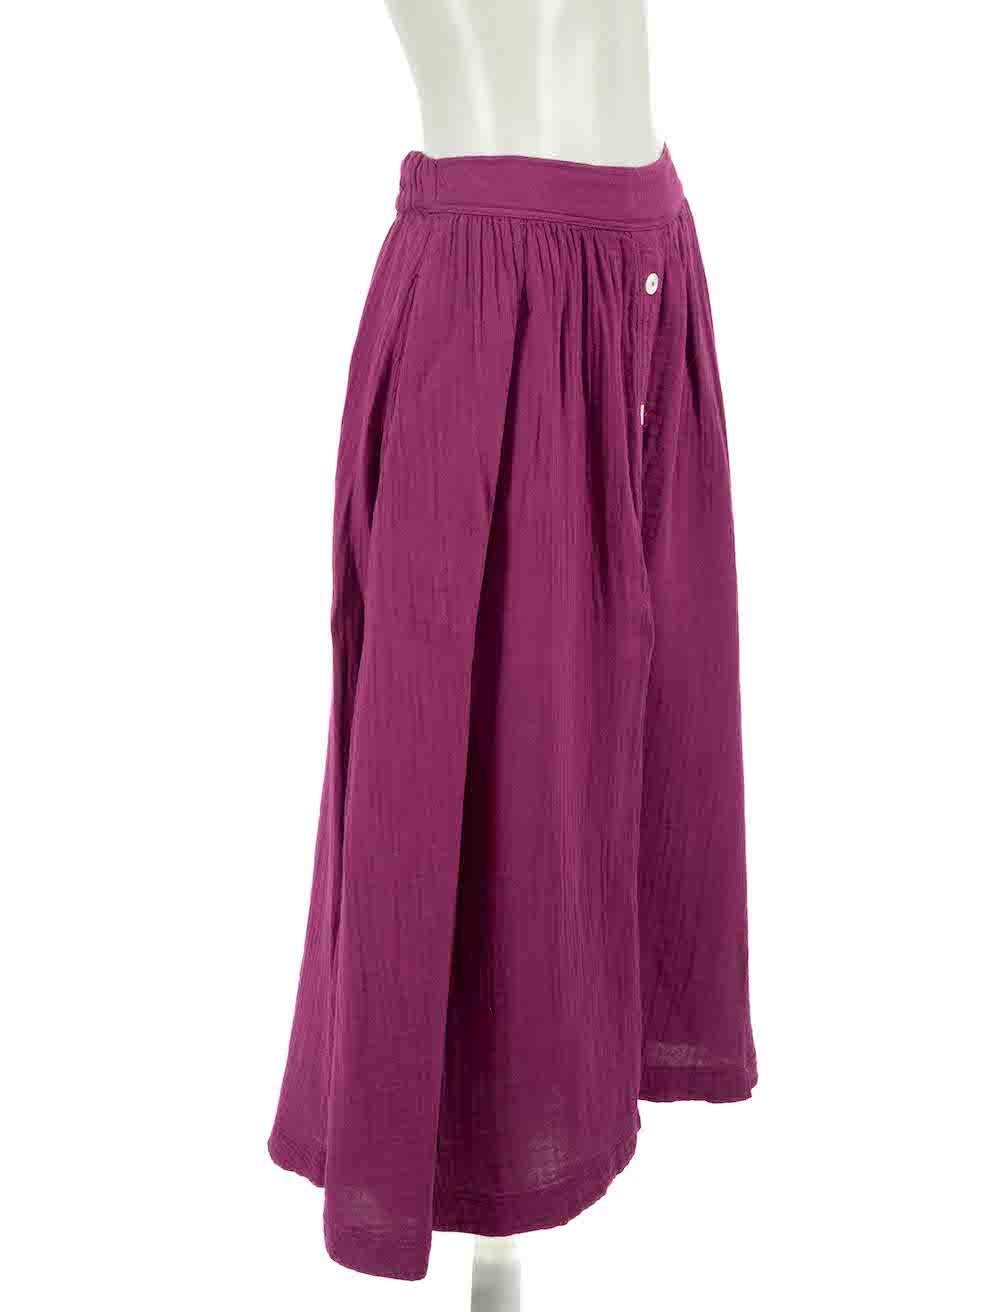 CONDITION is Good. Minor wear to skirt is evident. Light wear to fabric with a number of small plucks and pulls to the weave found throughout on this used Xirena designer resale item.
 
Details
Purple
Cotton
Midi straight skirt
Front button